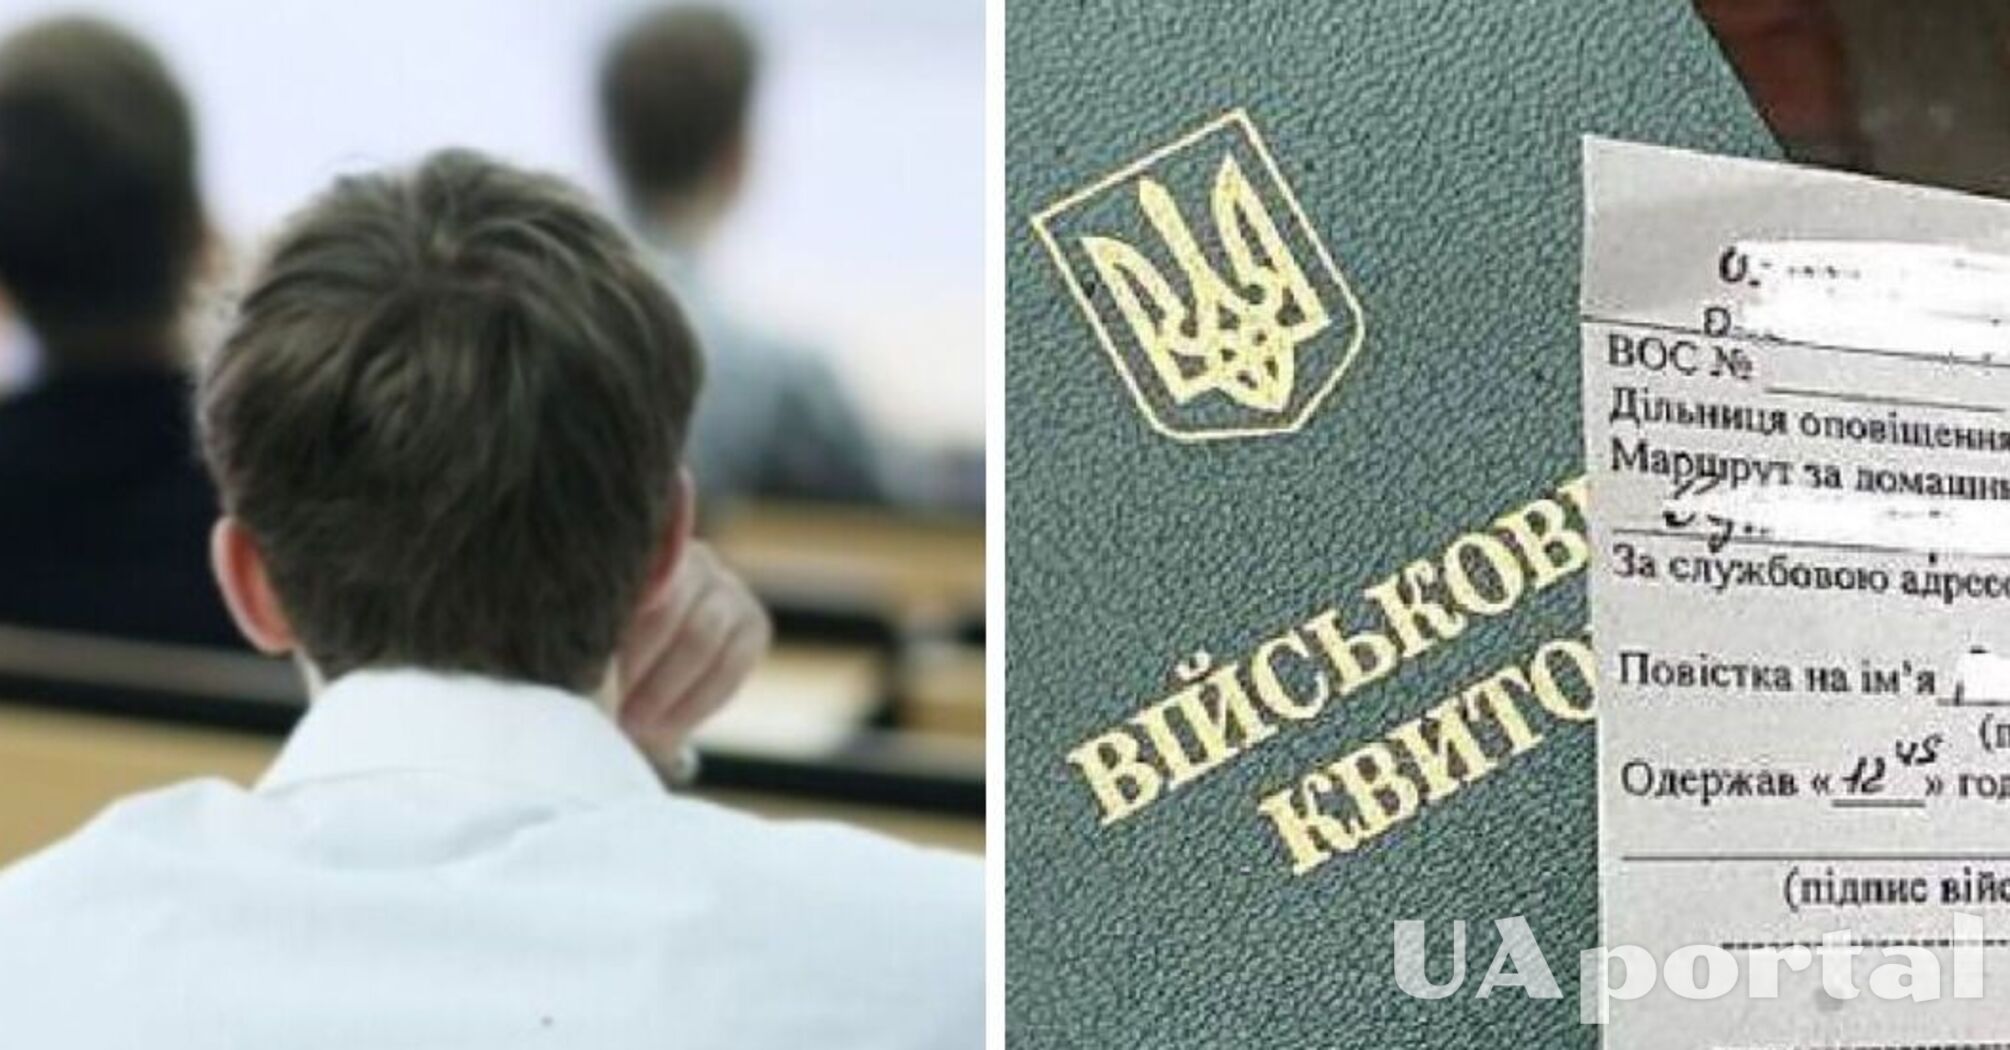 The new law on mobilization: which of the students will go to fight